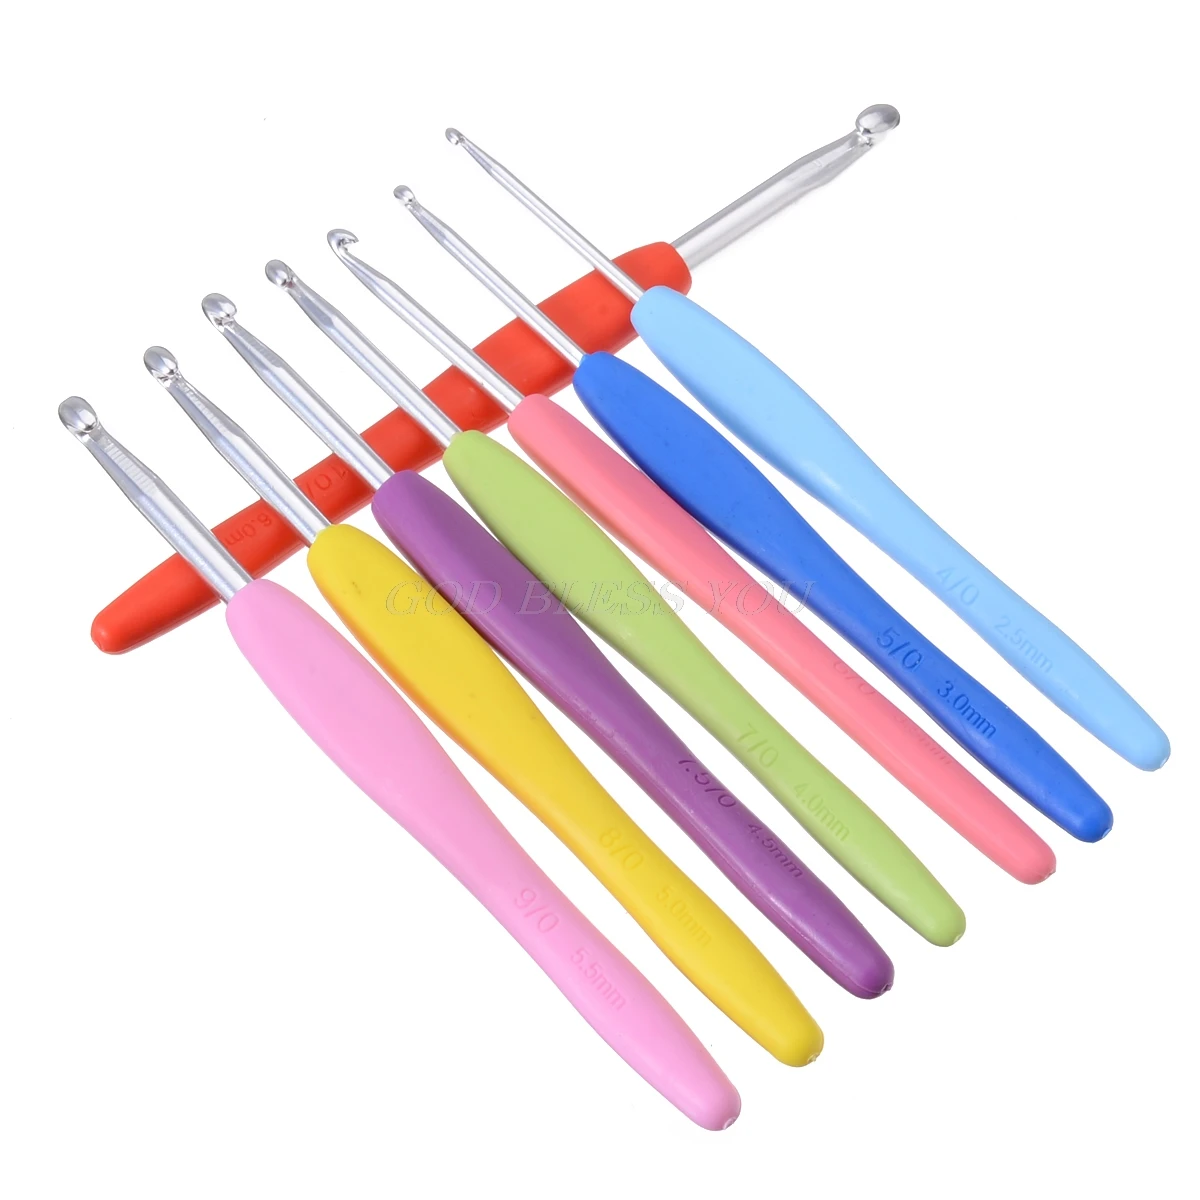 8 PCS Sweater Sewing Needles Aluminum Crochet Hook Knitting Needles with  Colorful Soft Handle Kit 2.5/3/3.5/4/4.5/5/5.5/6 mm